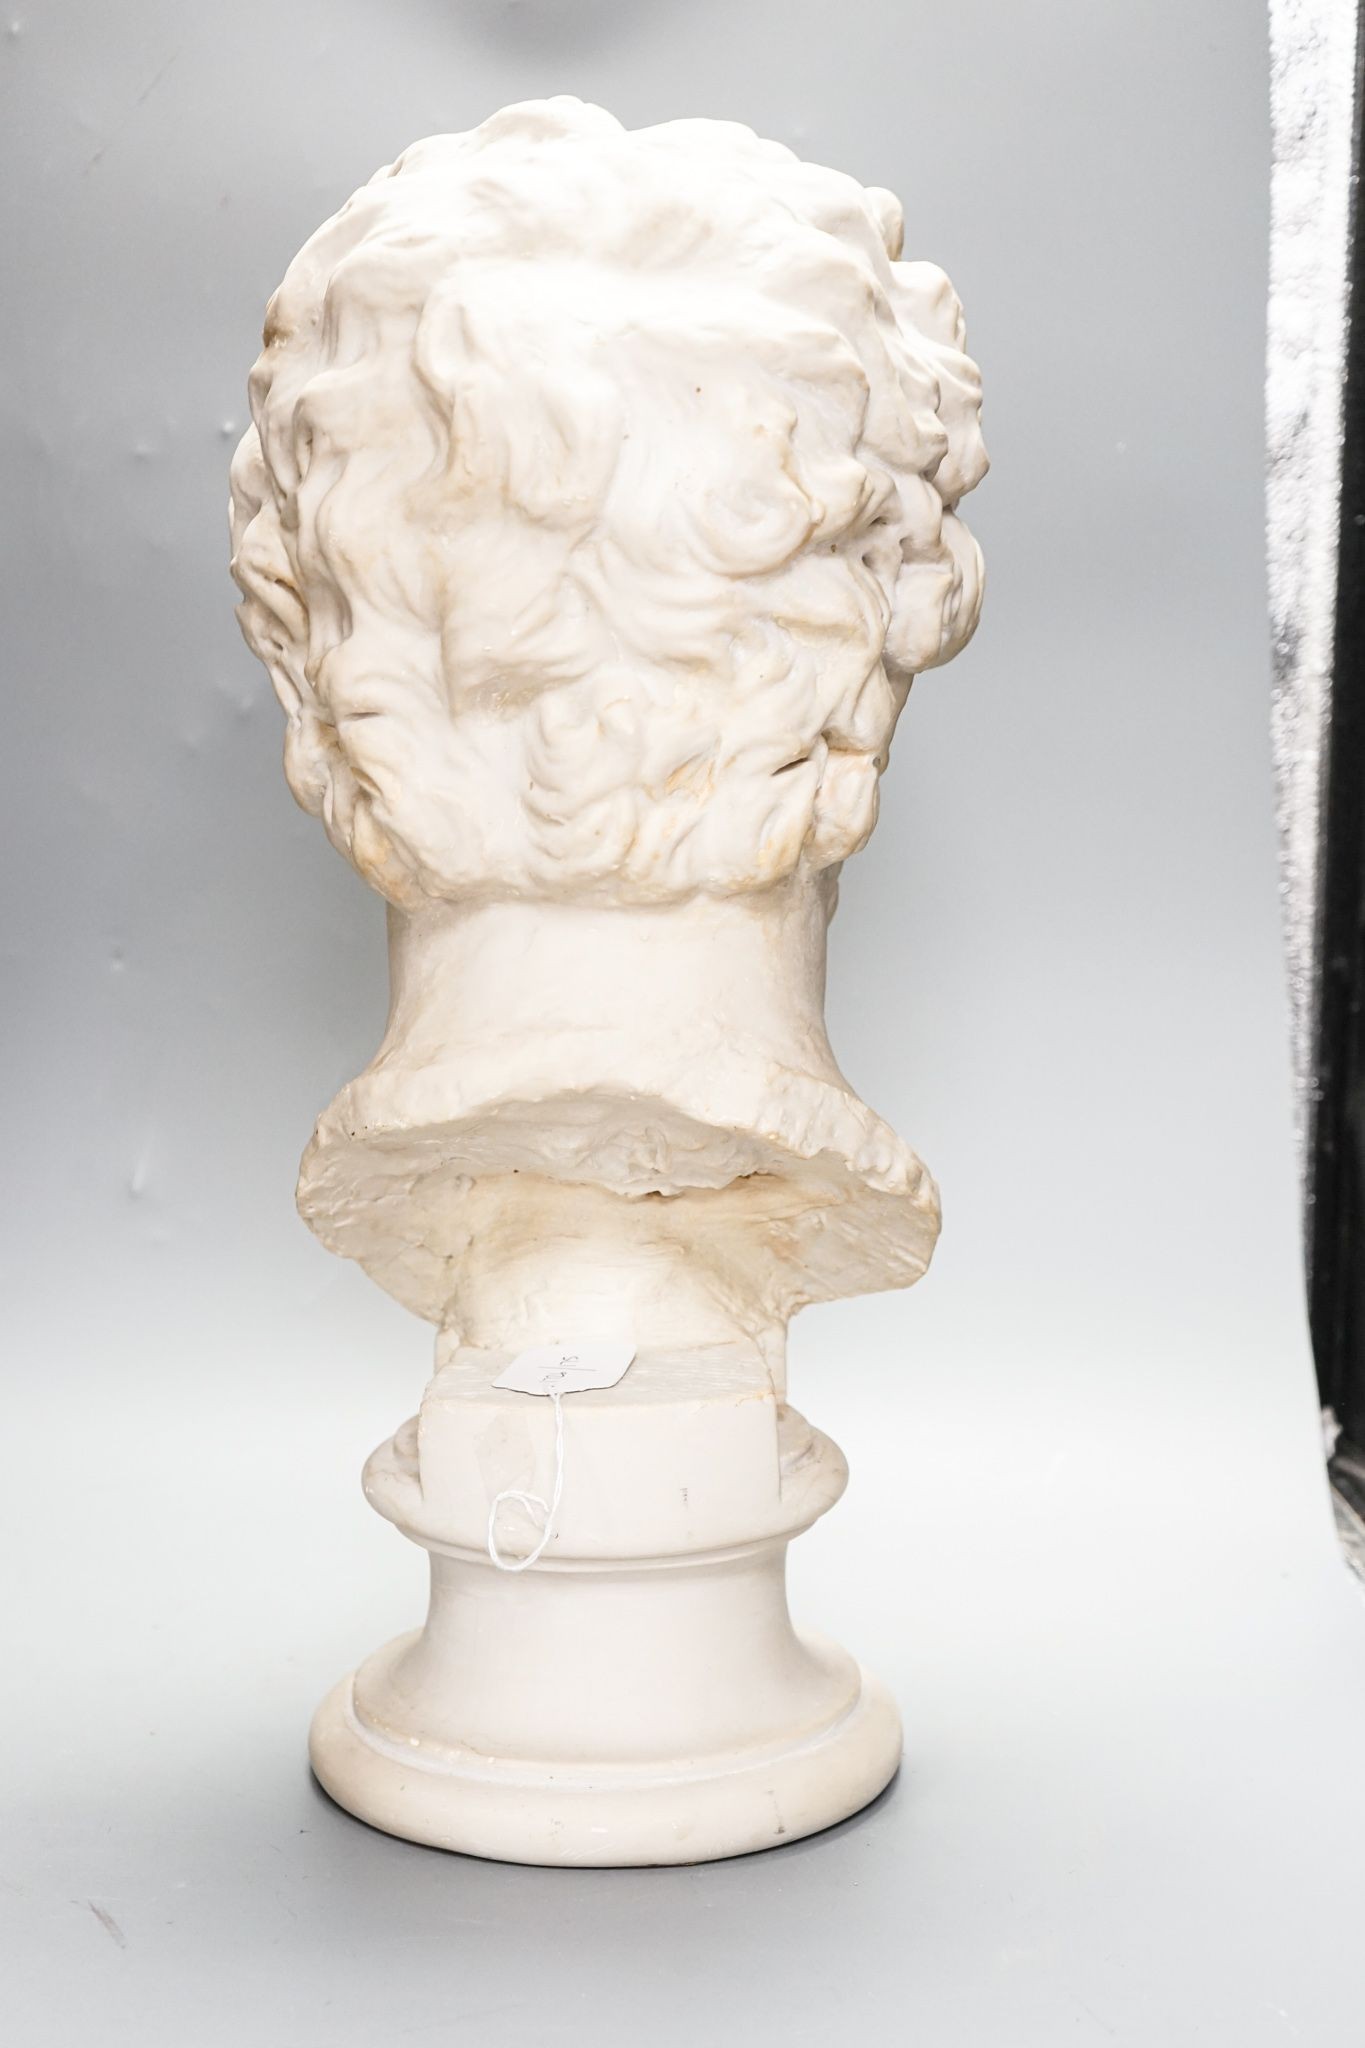 A large resin bust of a bearded man 51cm